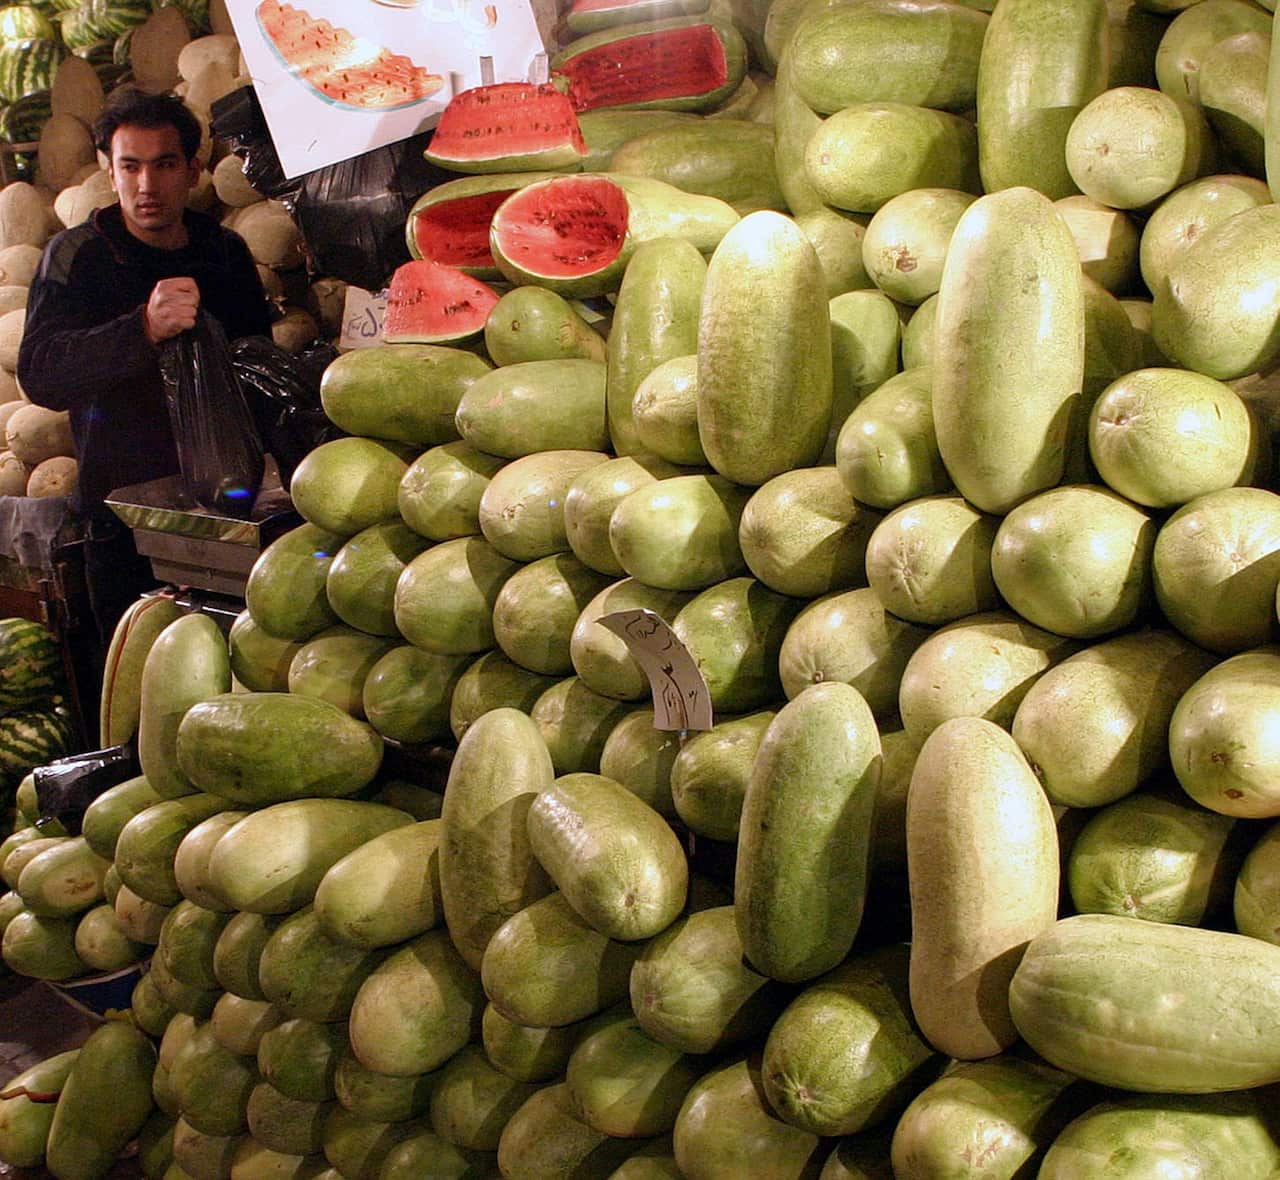 A man stands next to a large pile of watermelons for sale.